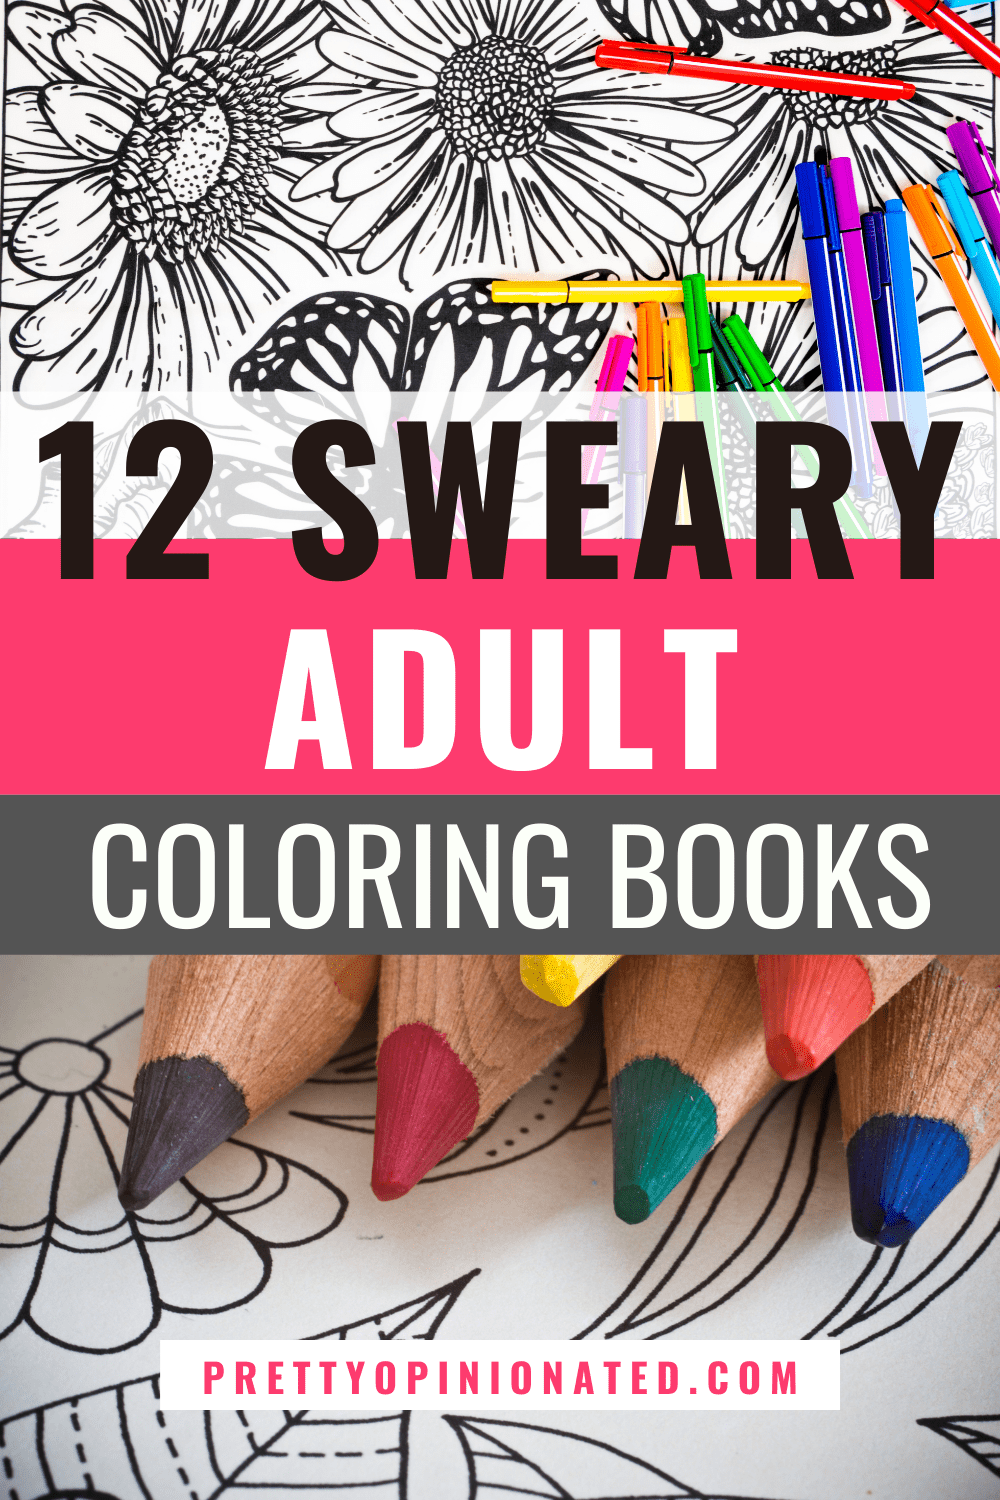 Adult Coloring Books Prove Important Books Don't Need Words